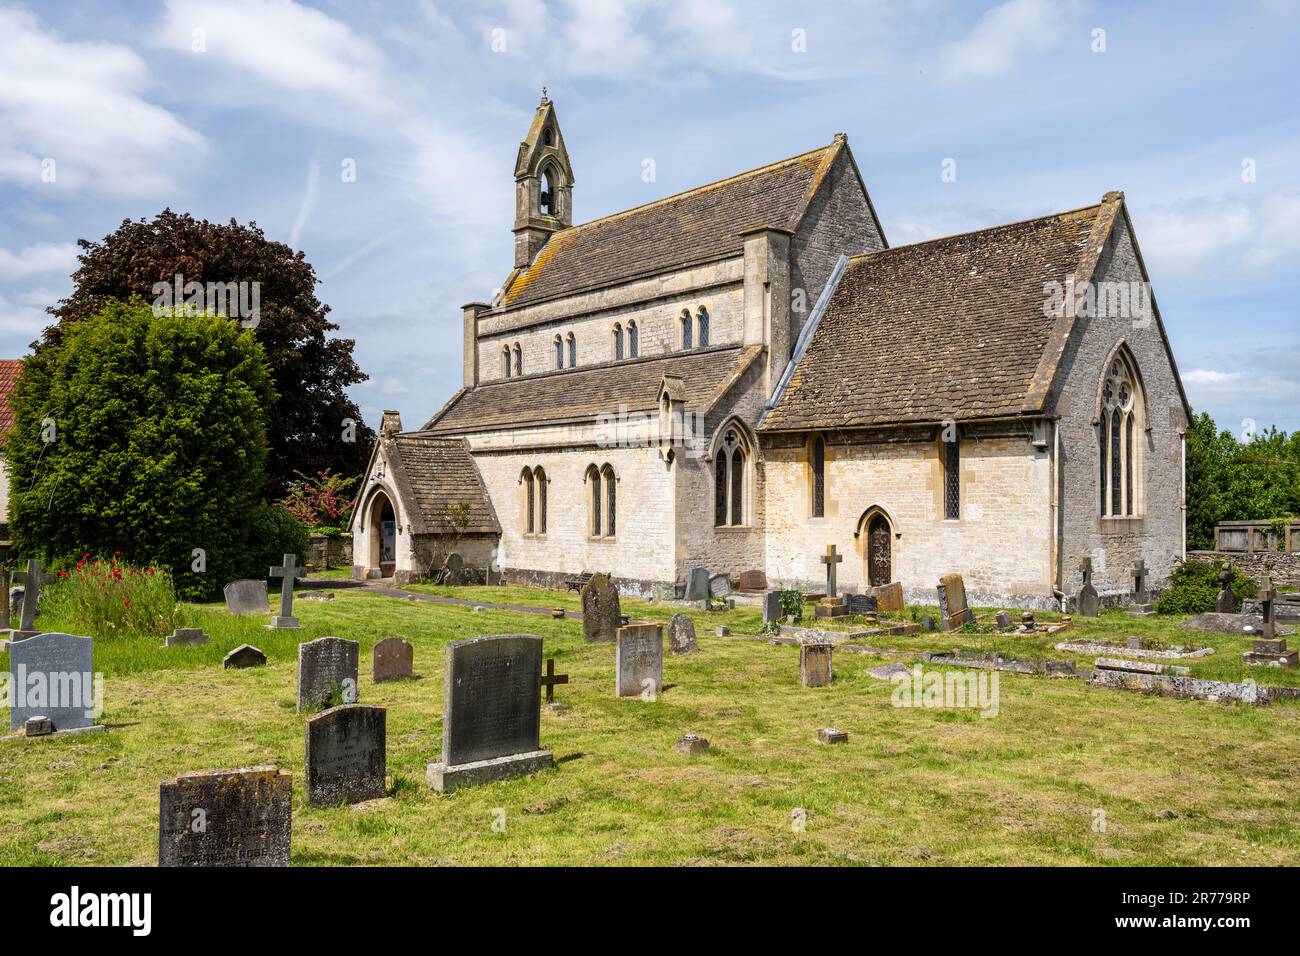 Die traditionelle Pfarrkirche St. Giles in Hillesley in Gloucestershire, England. Stockfoto